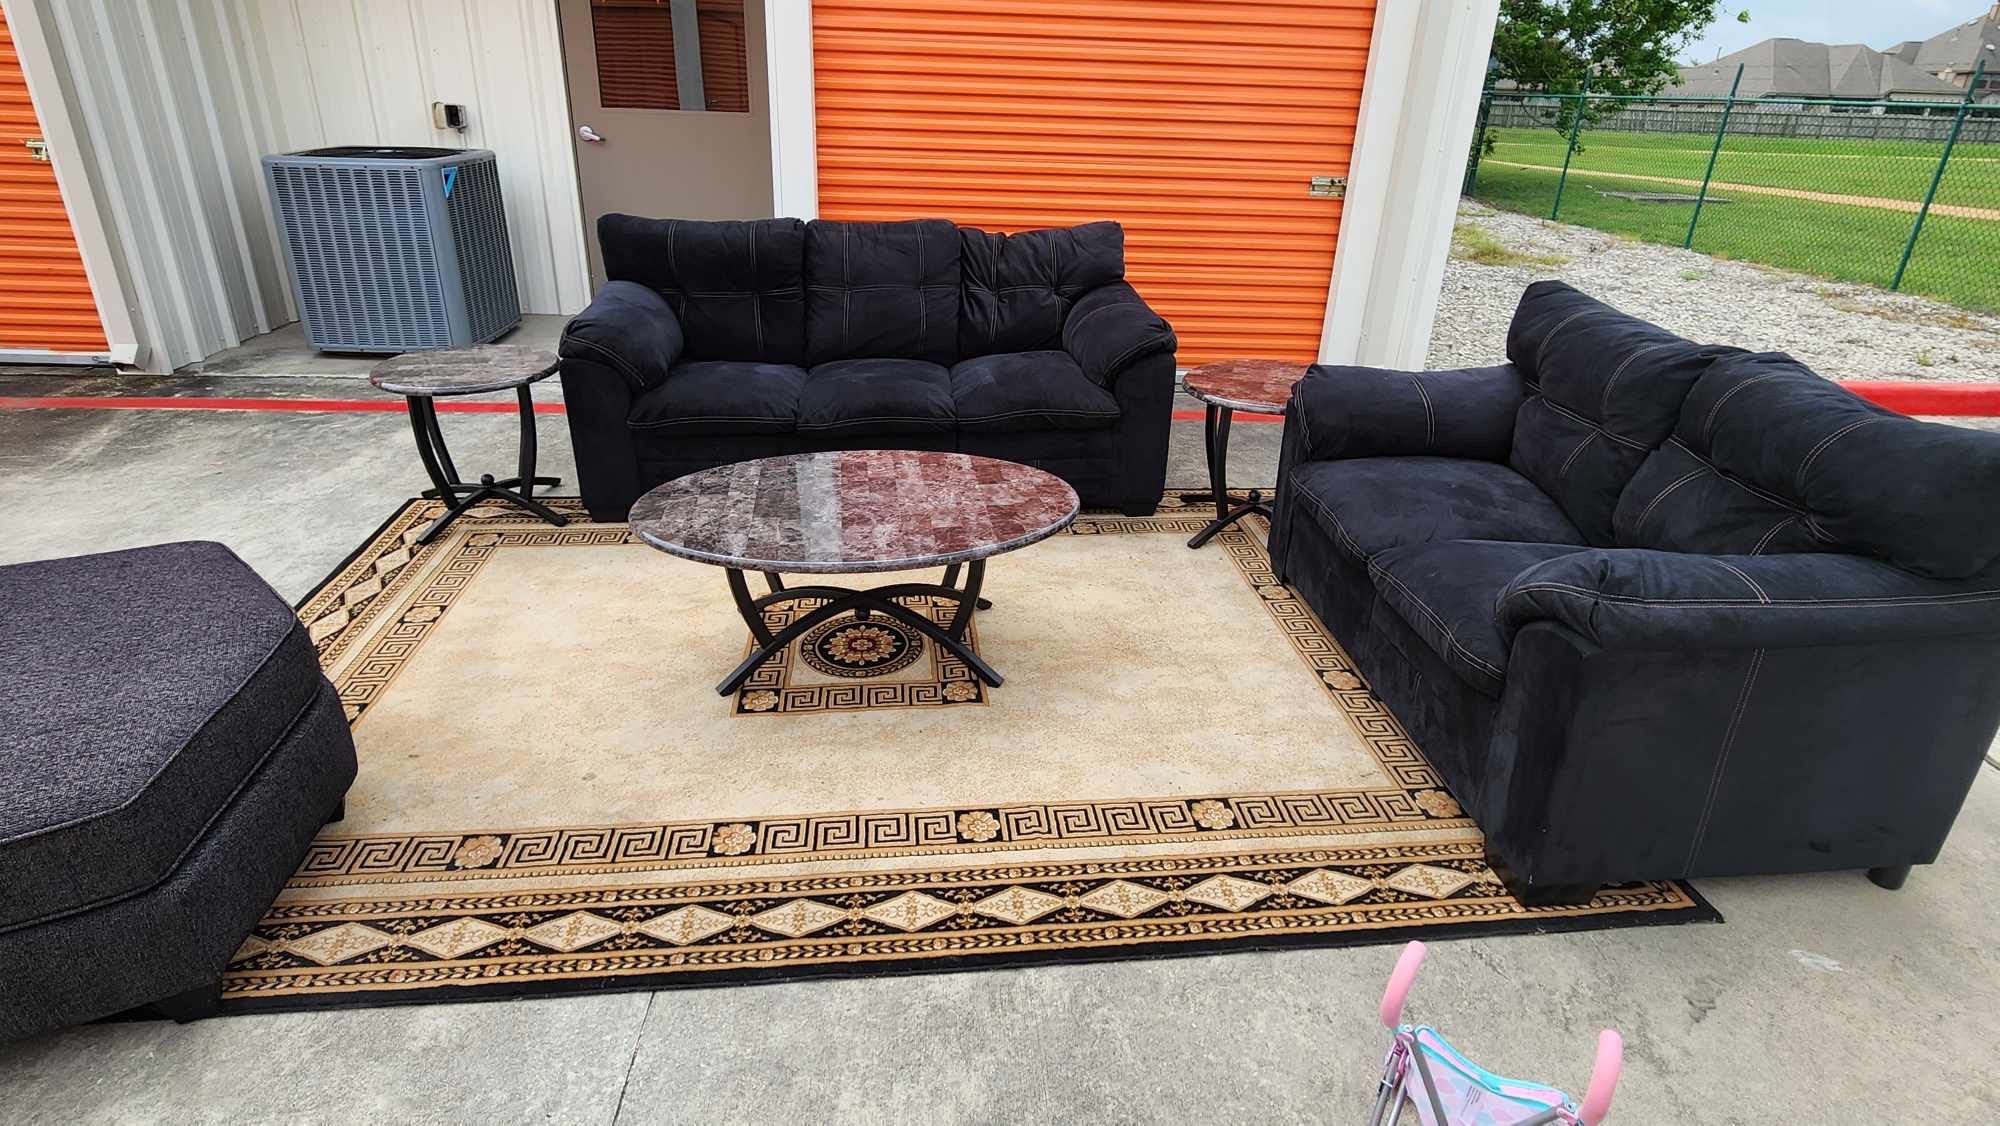 🔥FIRE SALE 🔥 Complete Living room and dining room set